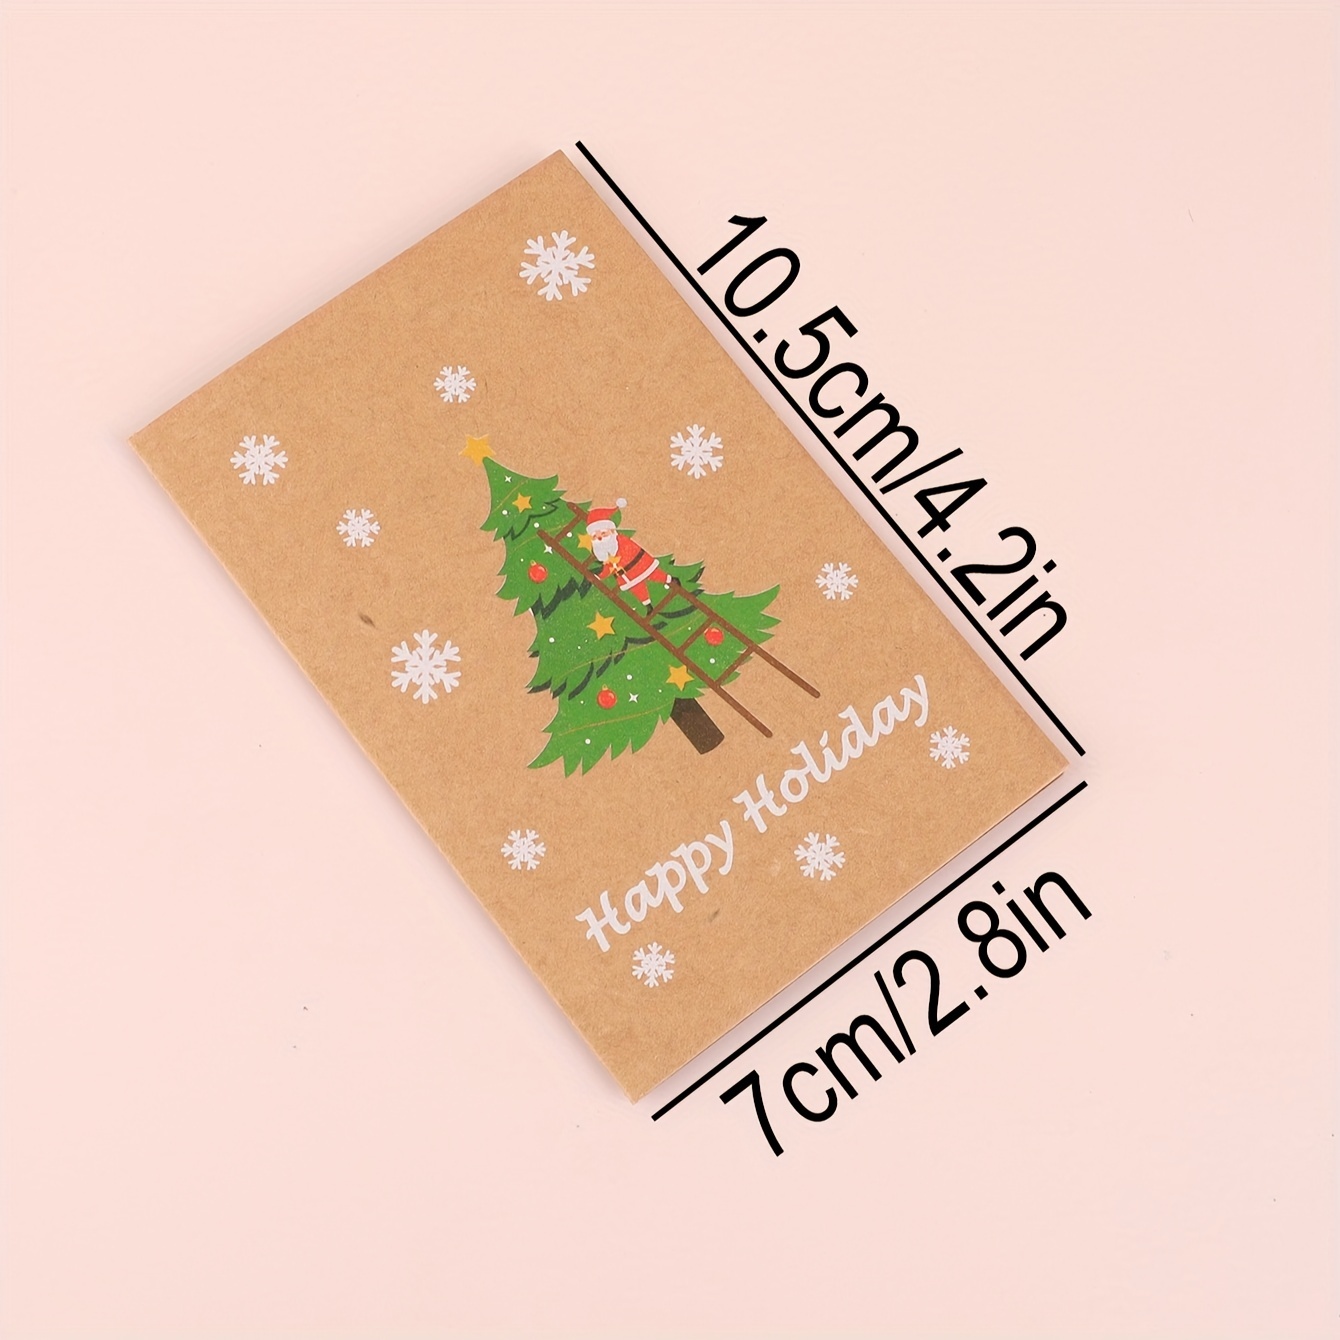 Happy Holidays Christmas Gift Card | Greeting cards